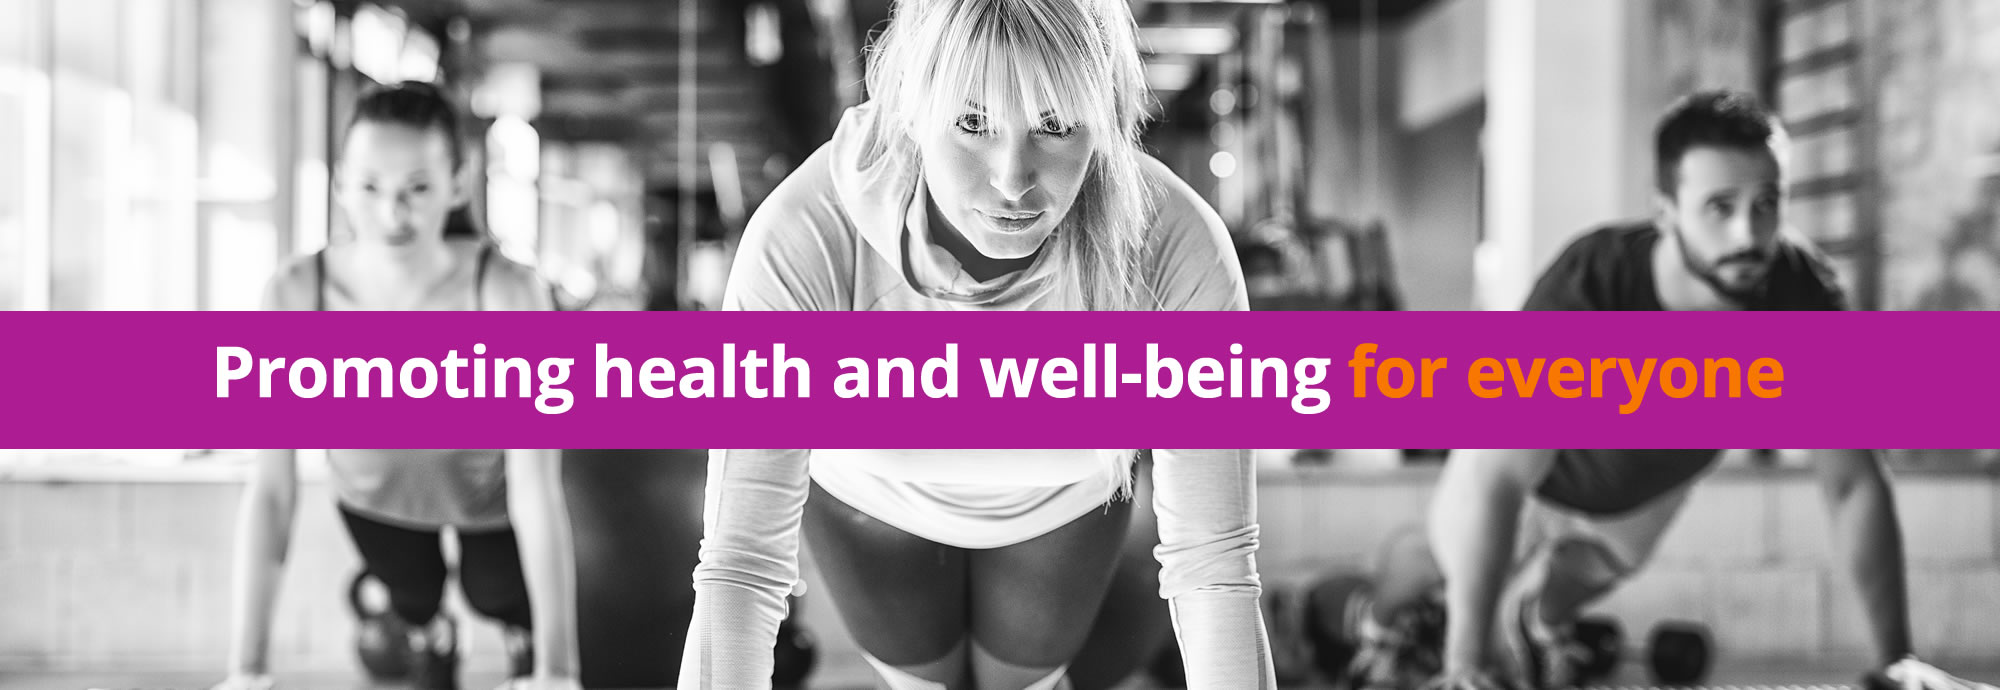 Paul Devlin Fitness and Well-being - Promoting health and Well-being for everyone